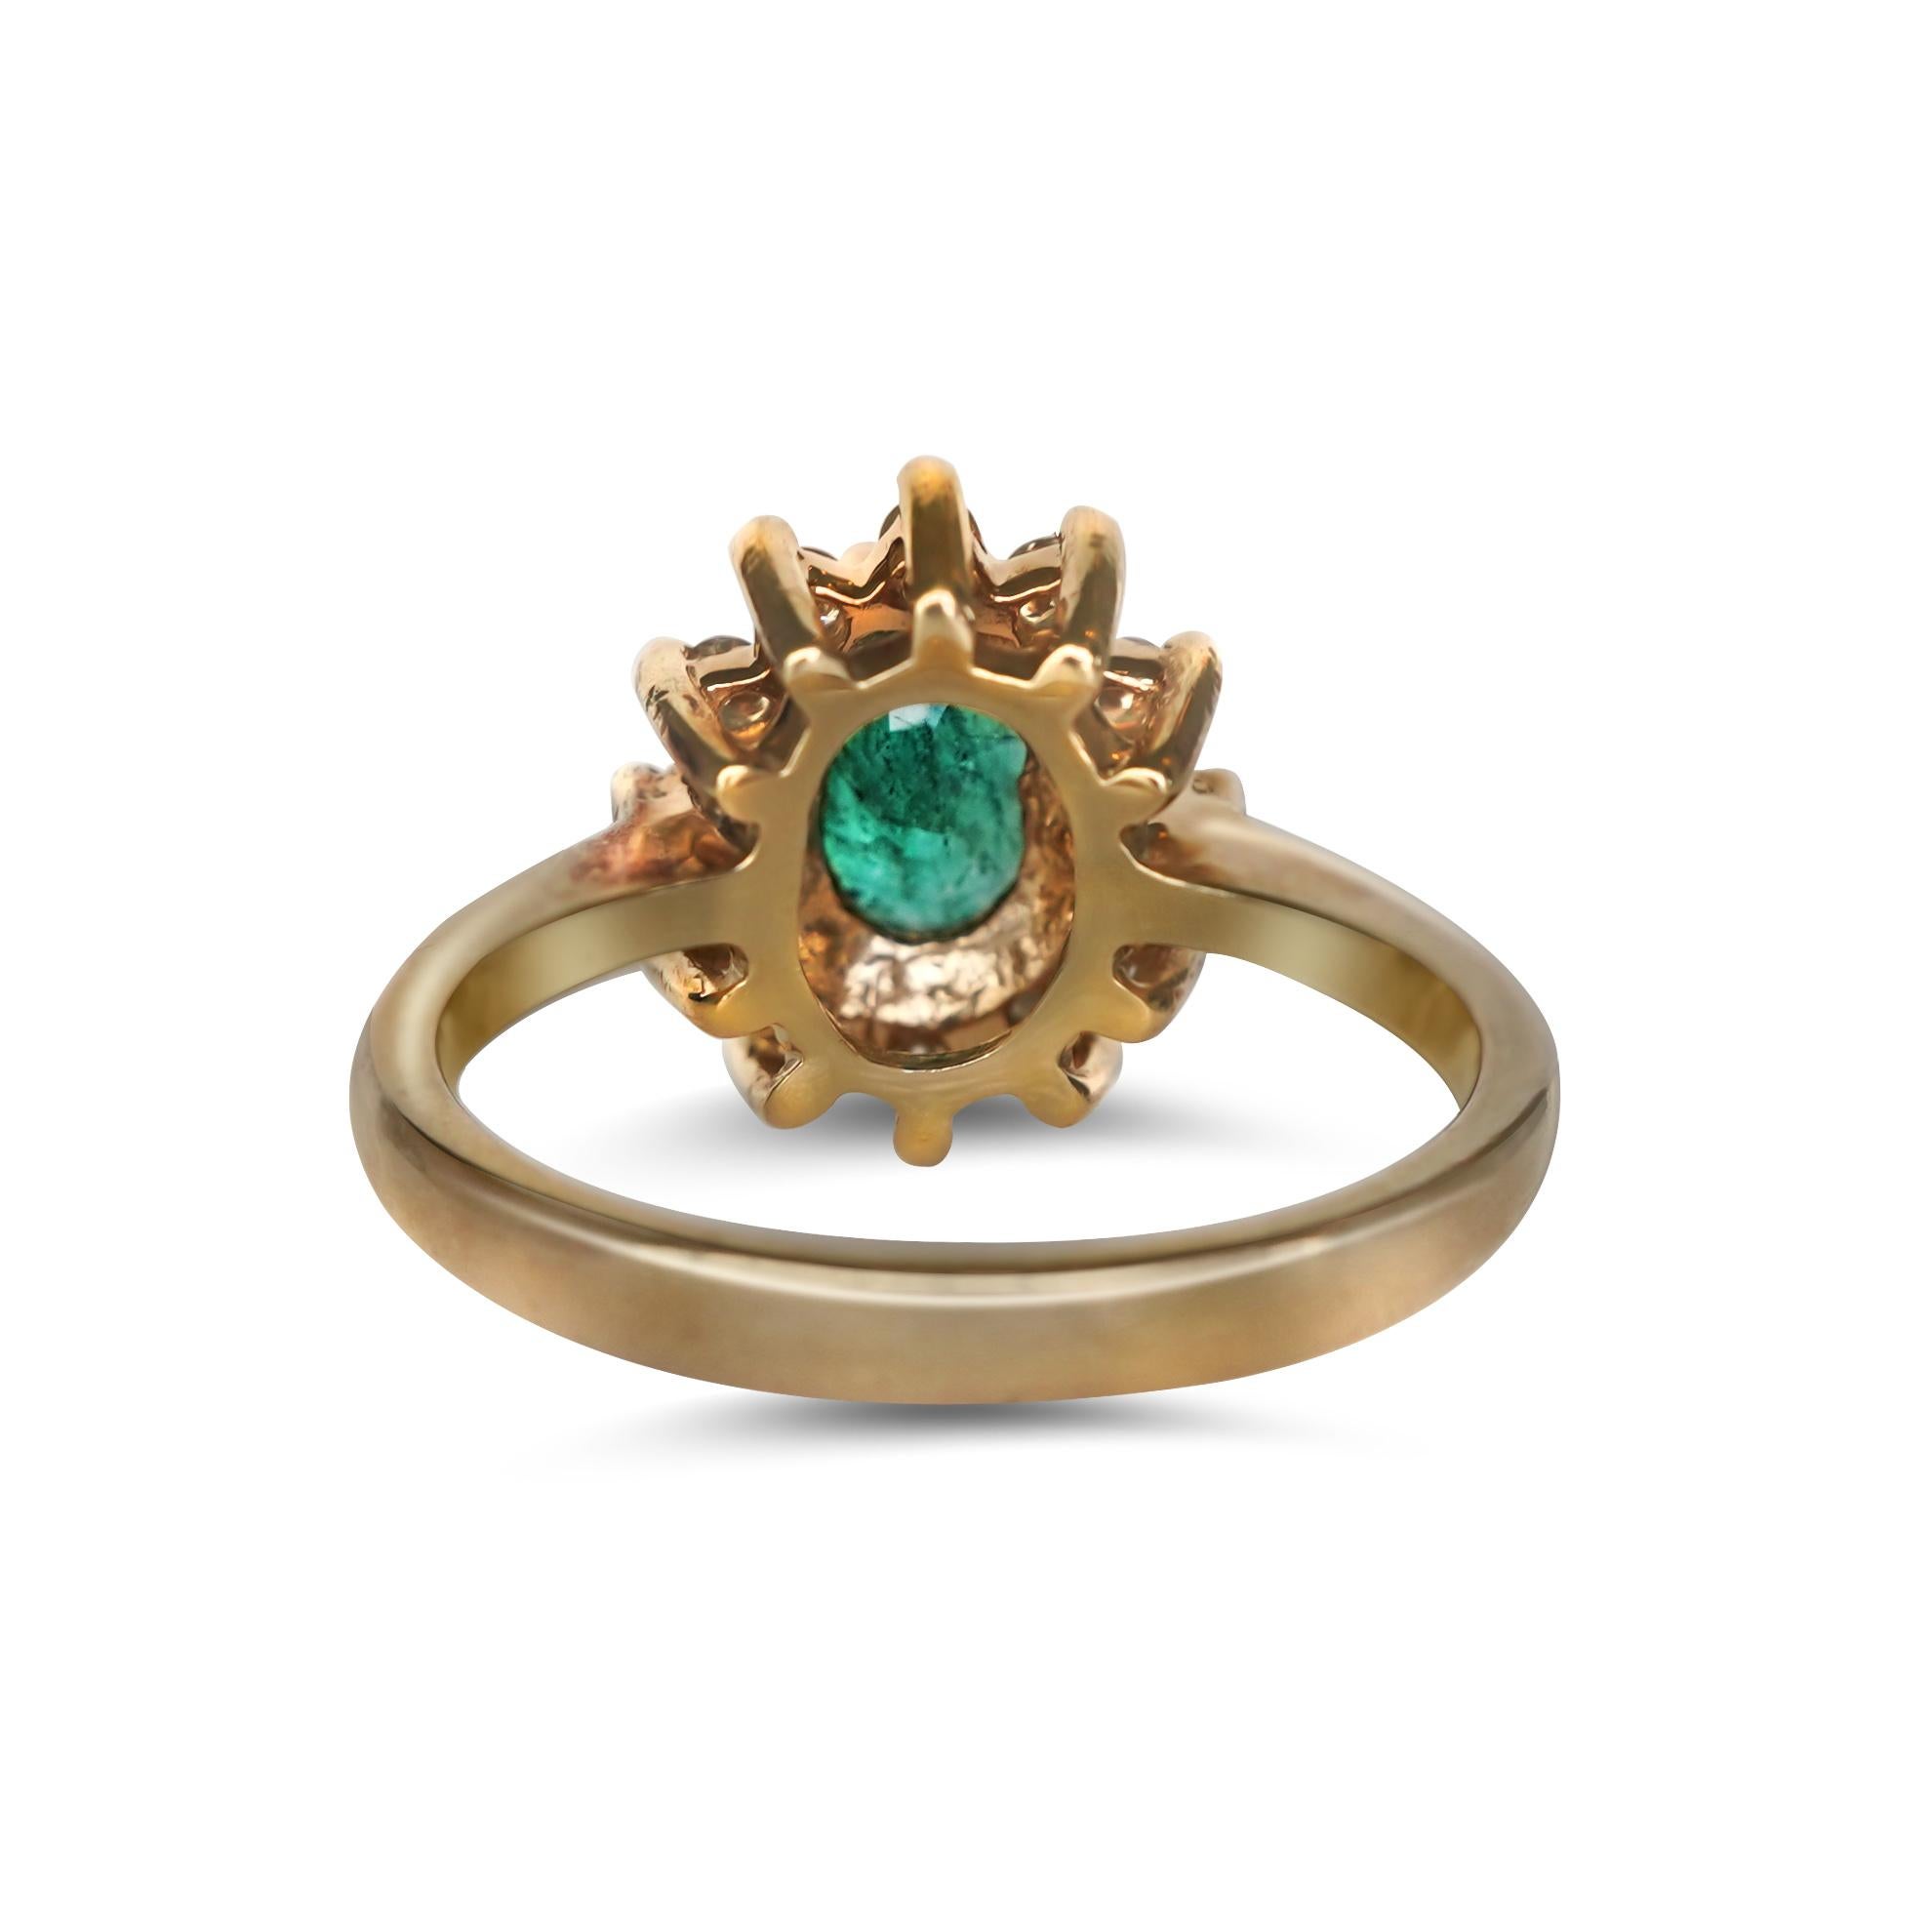 14K yellow gold ring with emerald center stone and 0.40 carat natural diamond side stones. The ring is surrounded by 12 round brilliant cut diamonds and claw set with oval cut emeralds.

Emerald dimensions: 0.50 ctw, length 6.87 mm, width 11.86